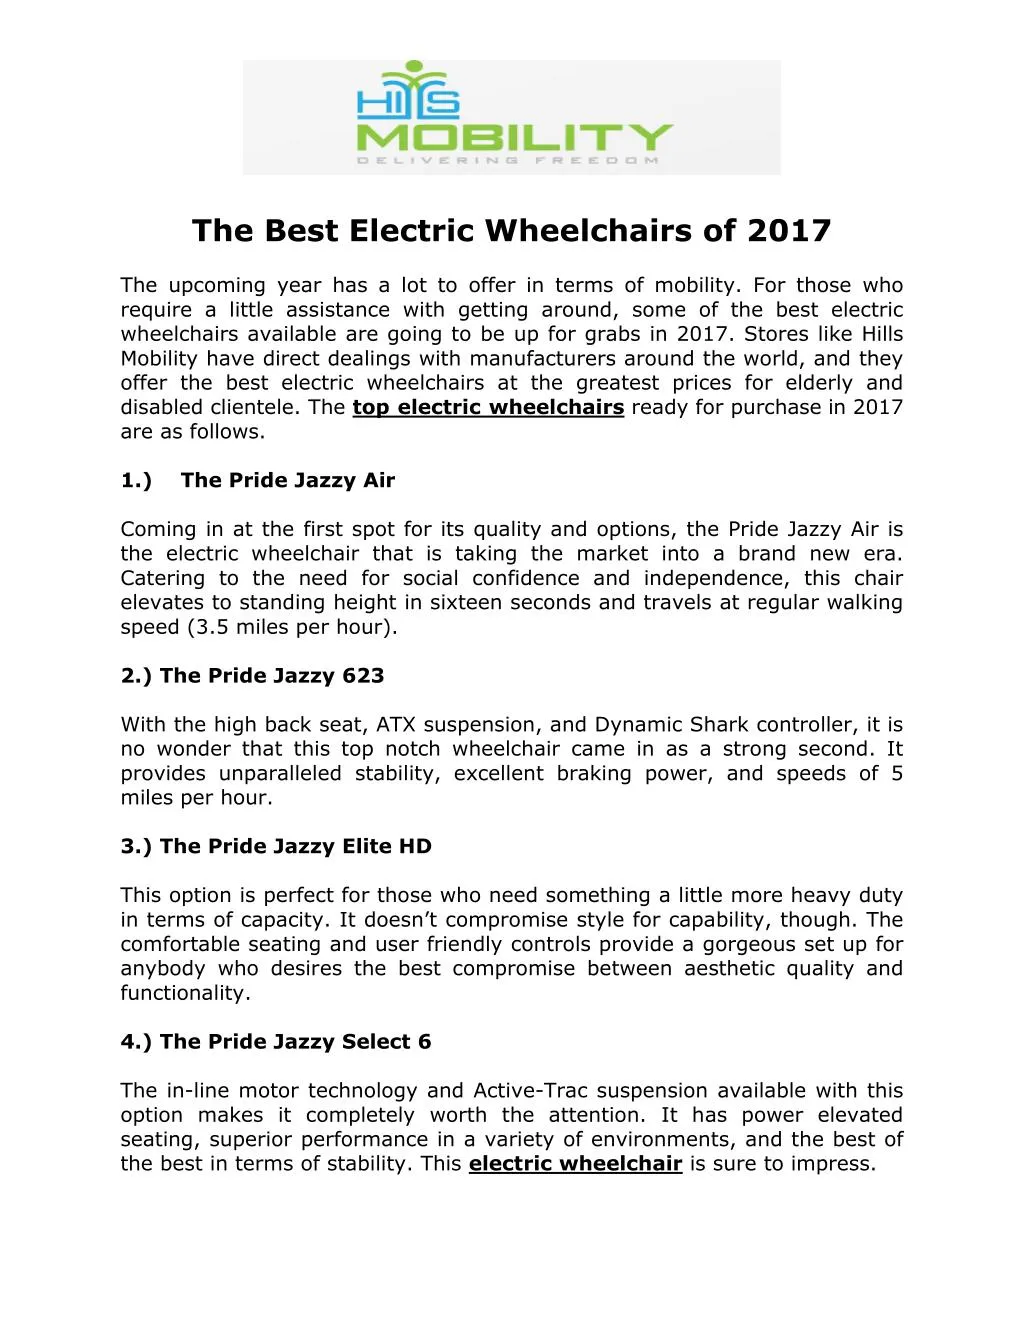 the best electric wheelchairs of 2017